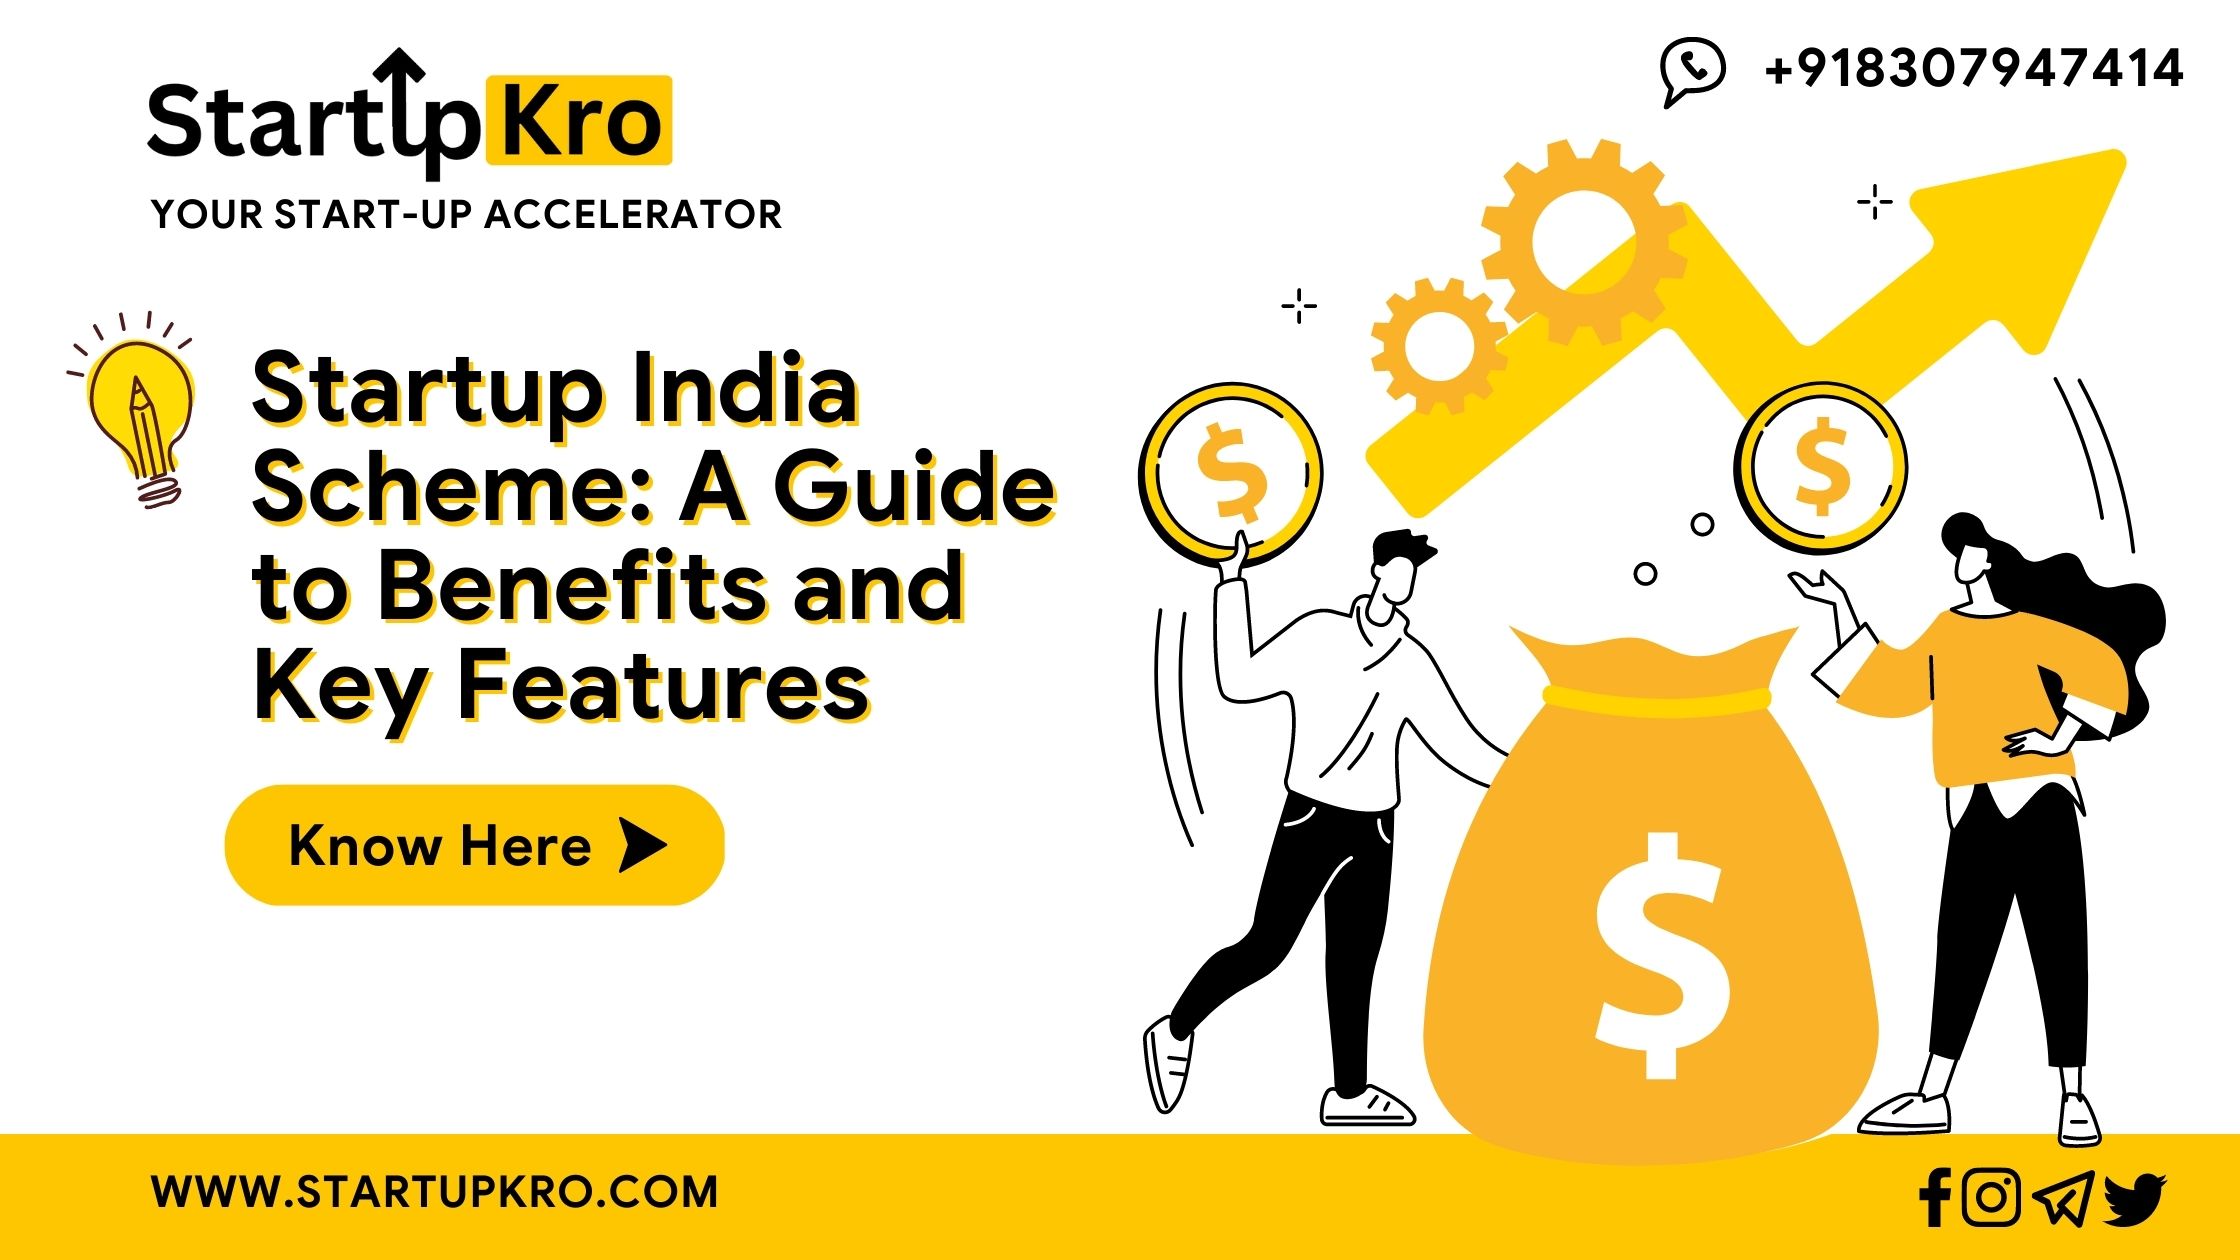 SUK Banner - Startup India Scheme A Guide to Benefits and Key Features